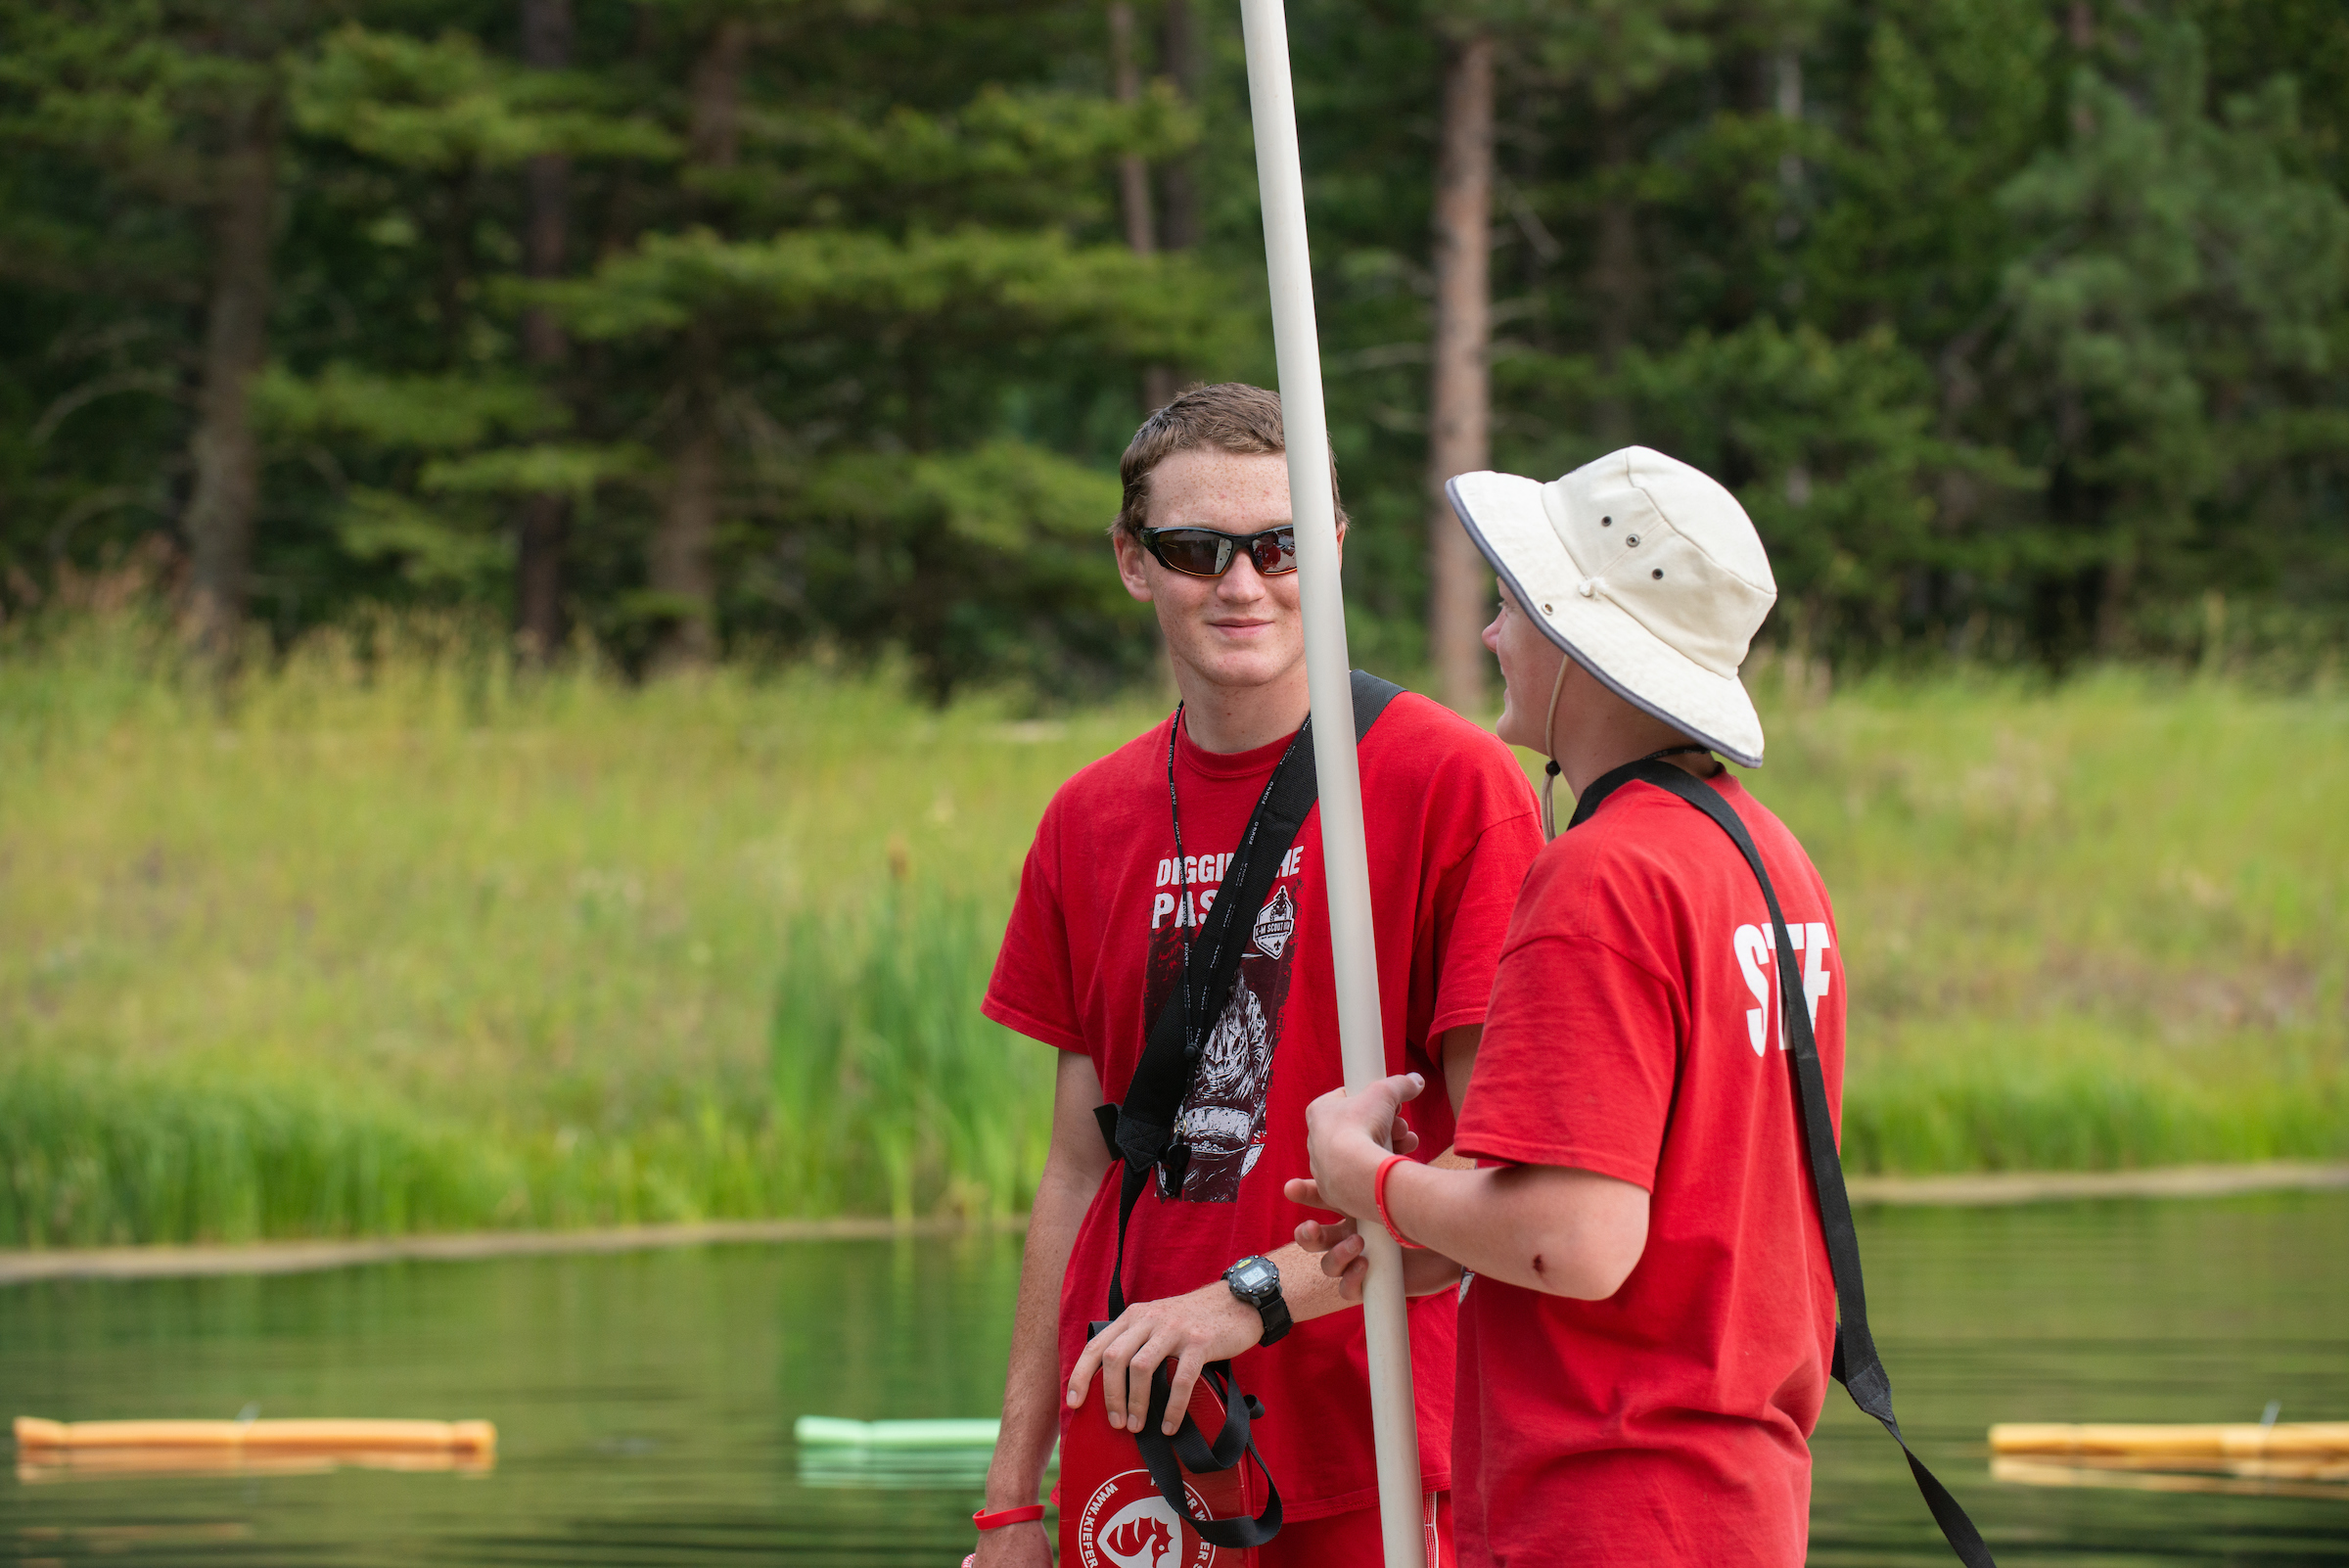 Two camp counselors in red t-shirts talk to each other on a dock